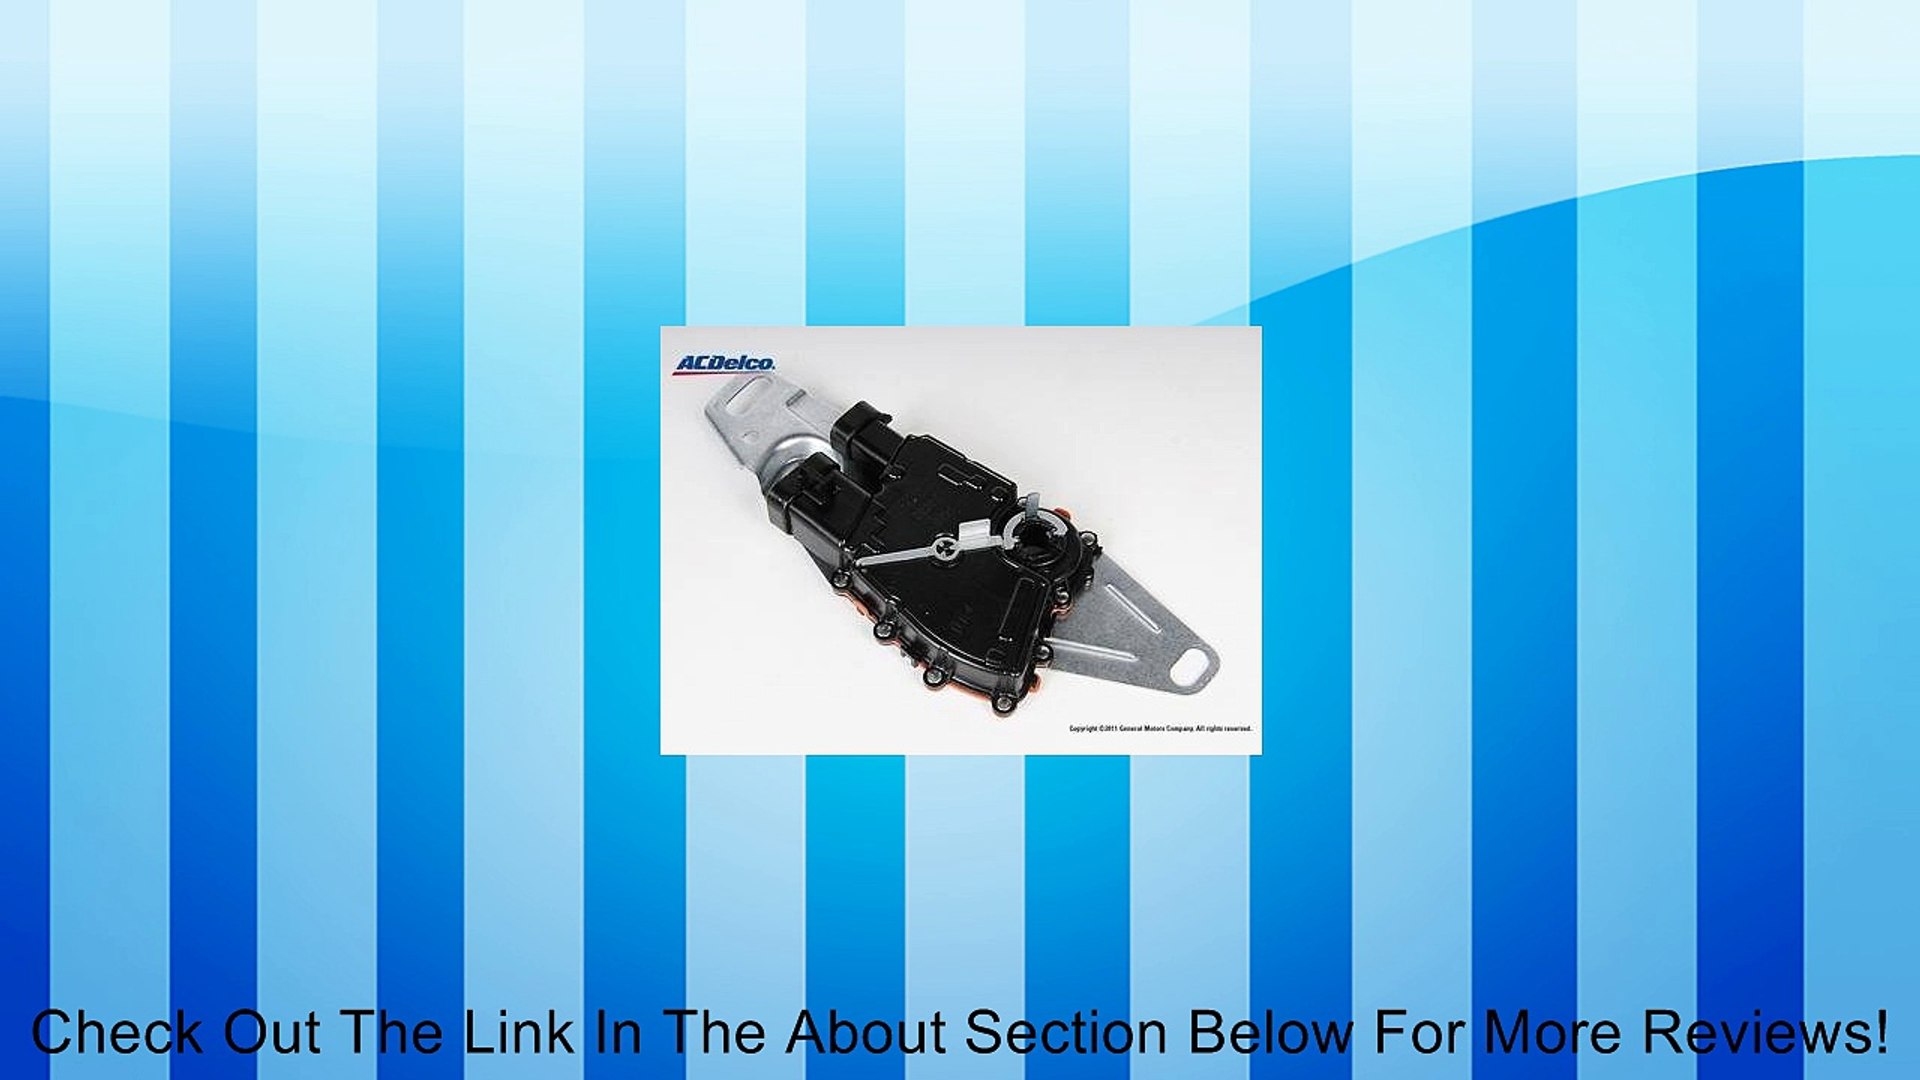 ACDelco D2263C Backup/Neutral Switch